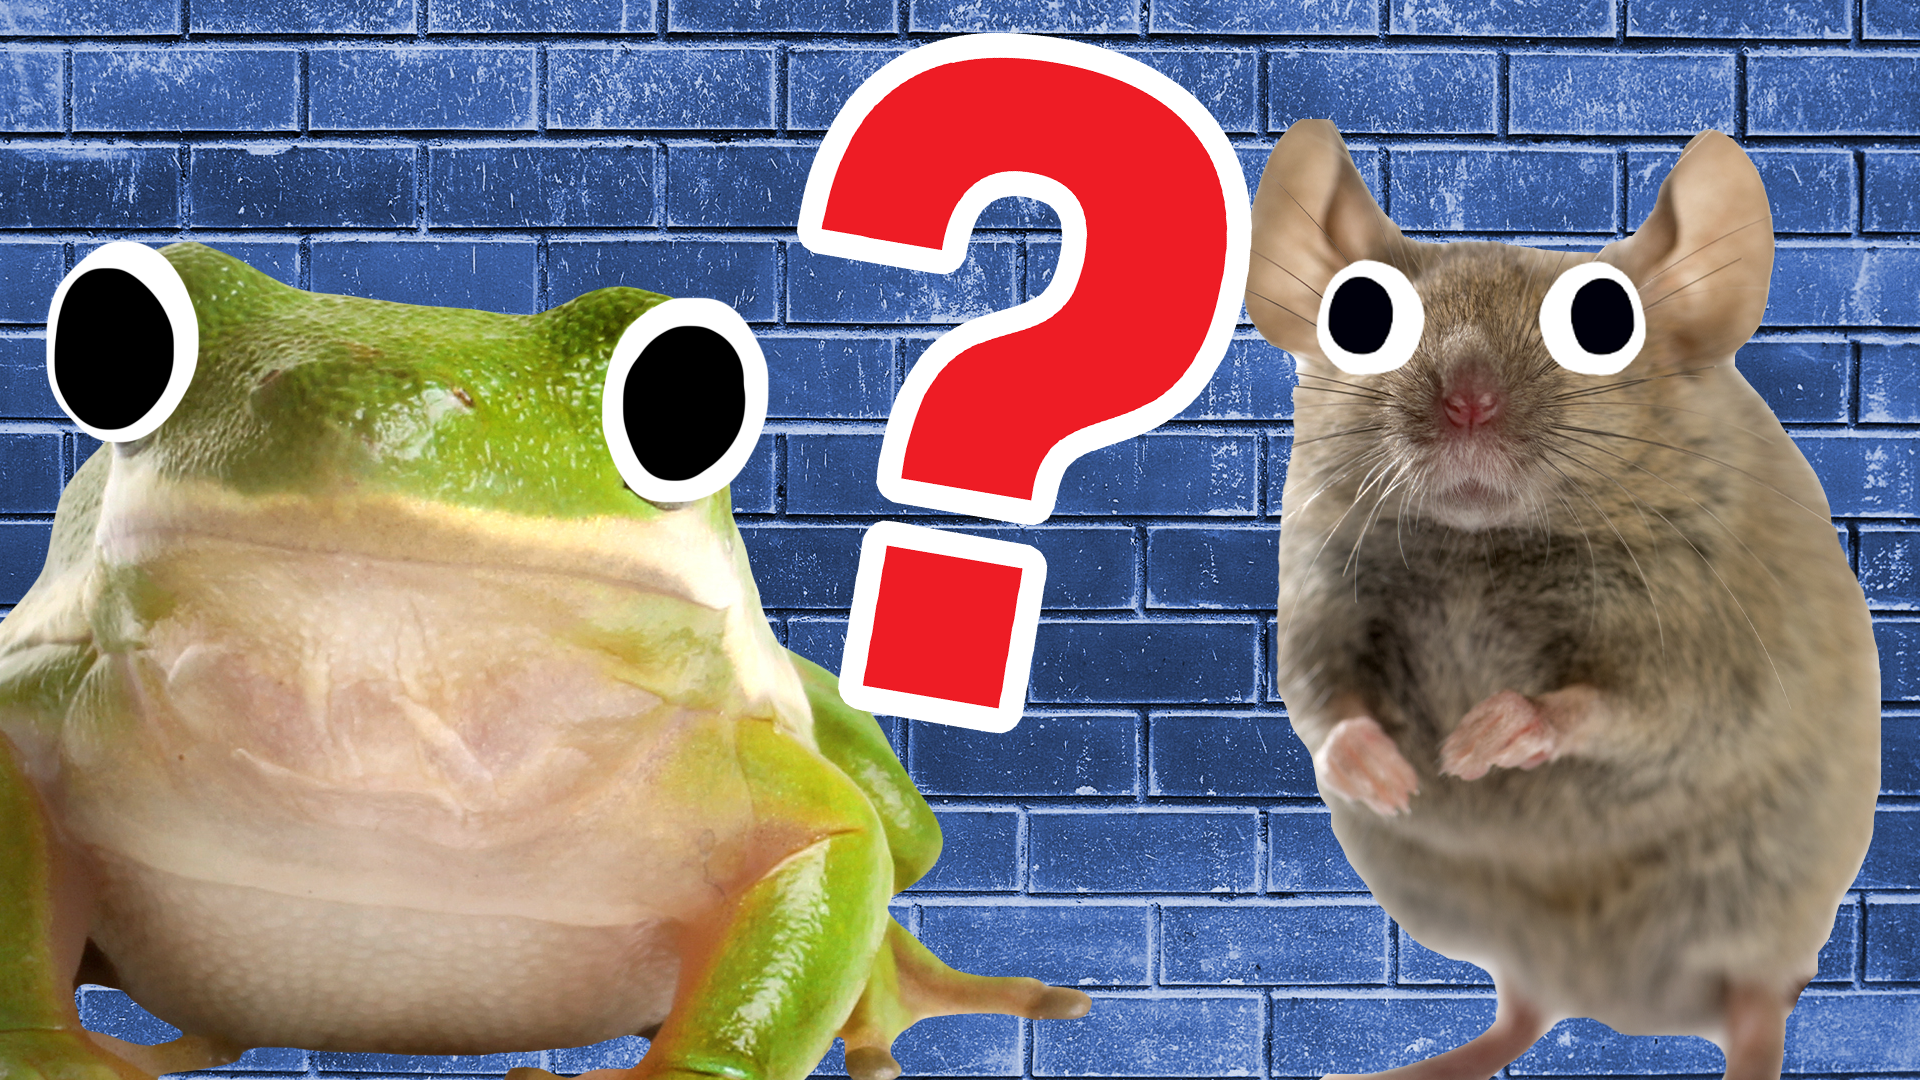 A frog, a mouse and a question mark